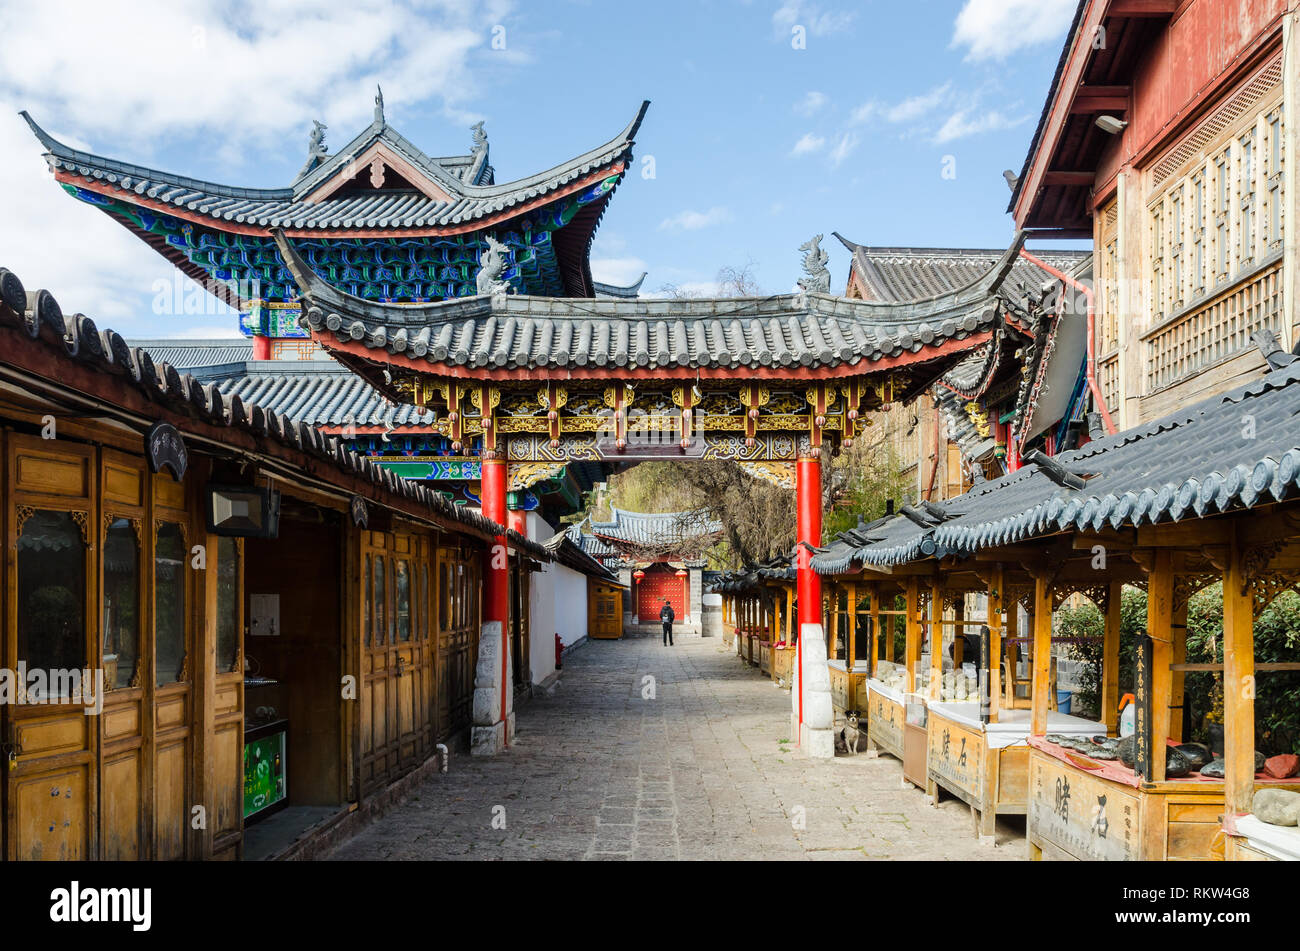 Ornate colorful gate built in traditional Chine style, Lijiang old town, Yunnan, China Stock Photo